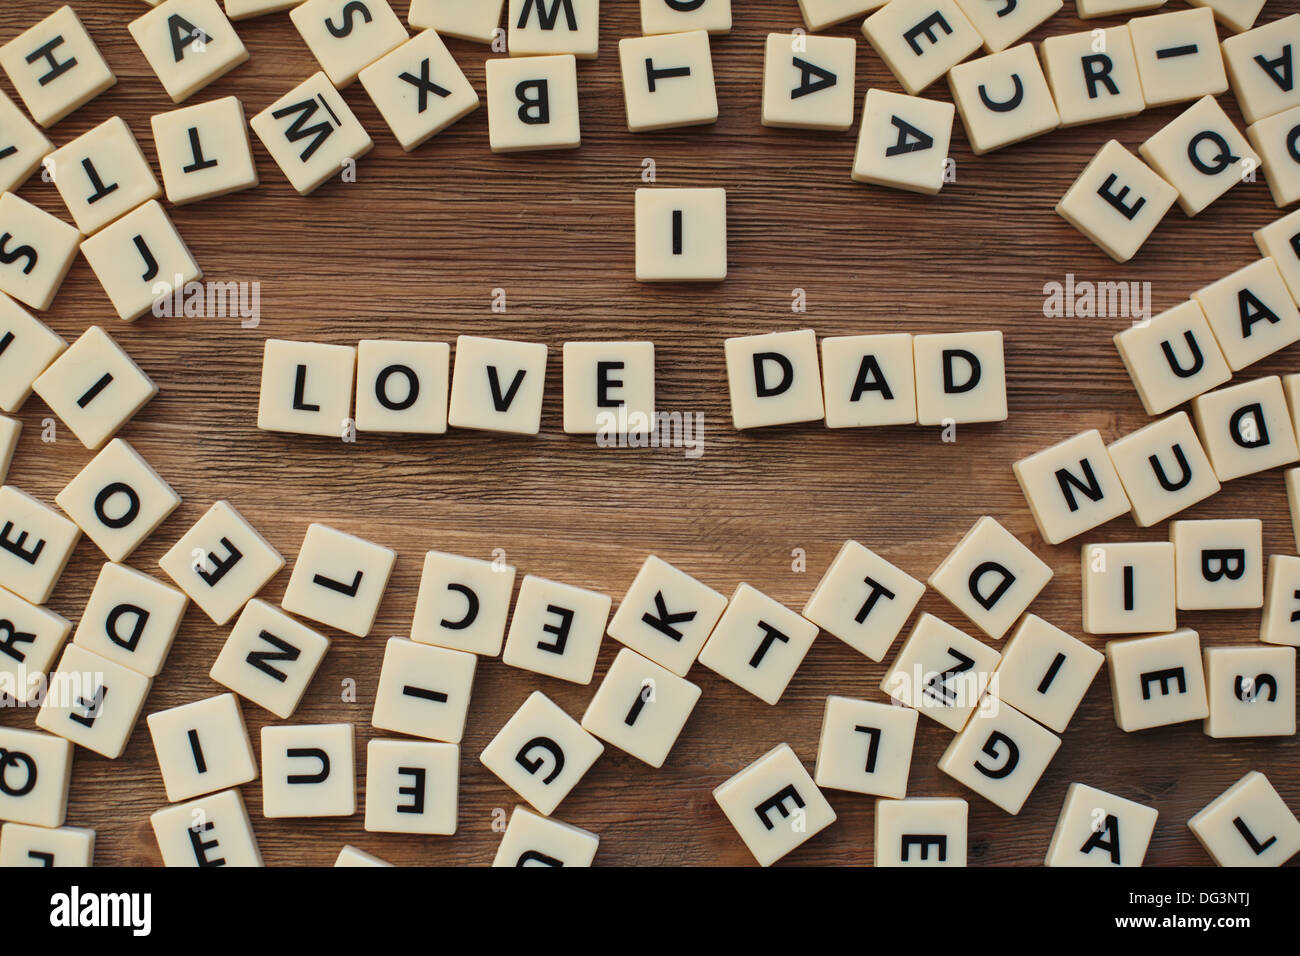 Plastic letters from a childrens' spelling game on a wooden table spell 'I Love Dad' Stock Photo